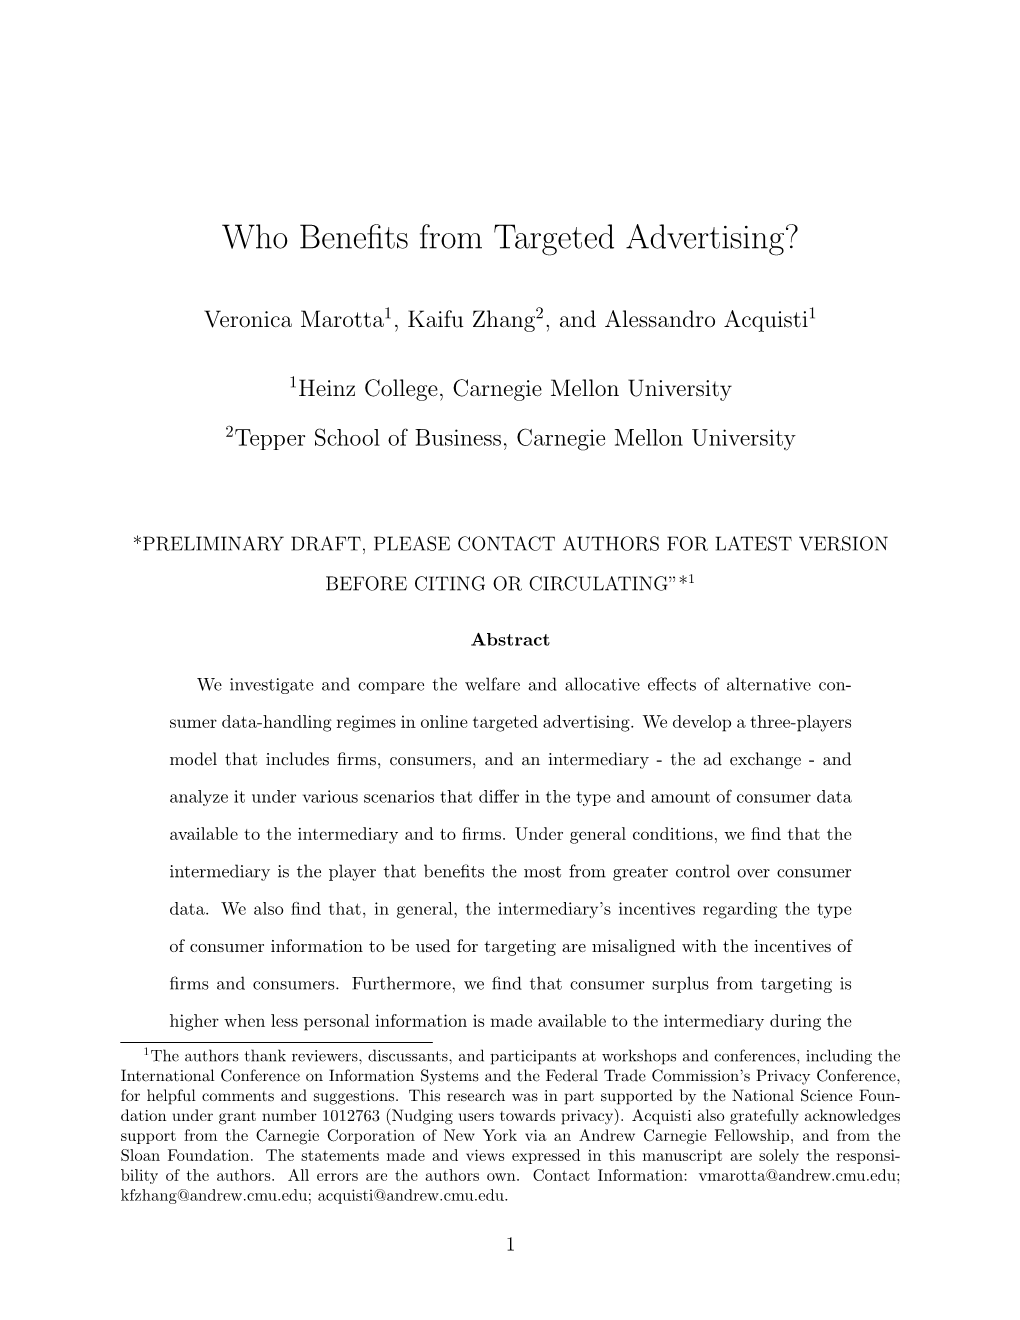 Who Benefits from Targeted Advertising?